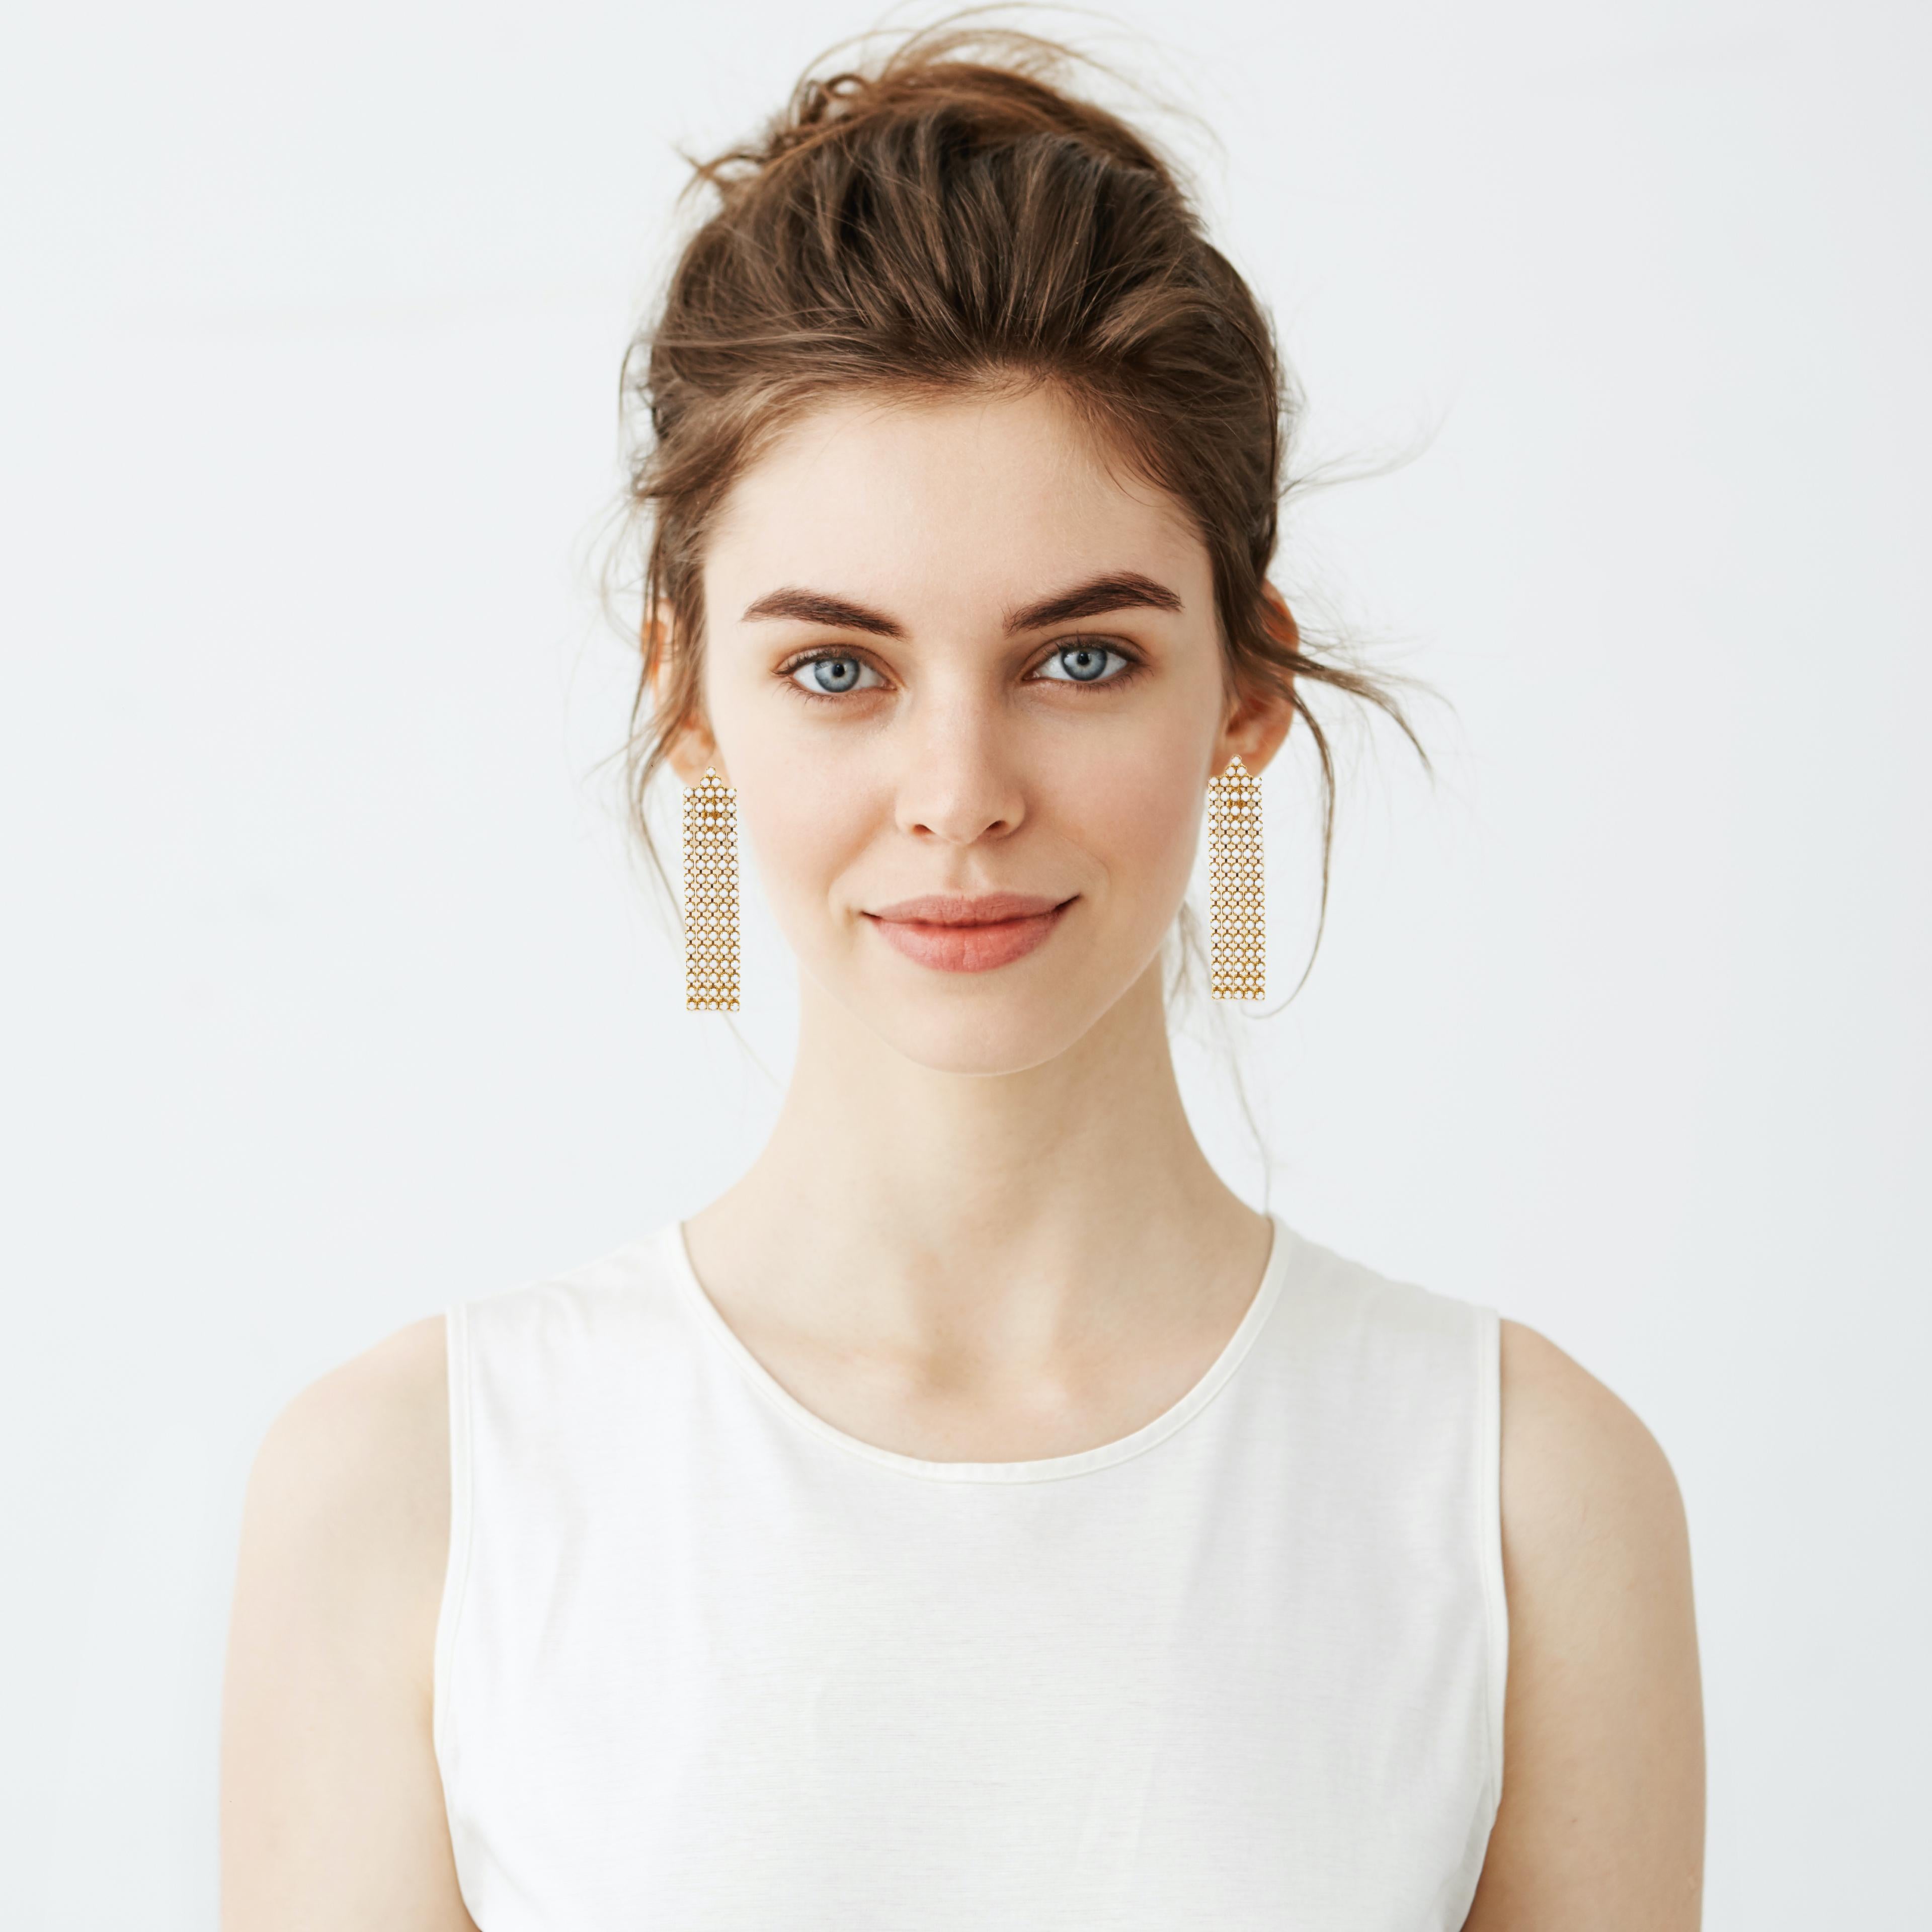 These chic vintage gold-plated milk glass rhinestone chandelier clip-on earrings are a must-have for vintage jewelry lovers! Fringe-style chandelier earrings have been a popular trend for decades. Perfect for fashionistas and vintage lovers, these